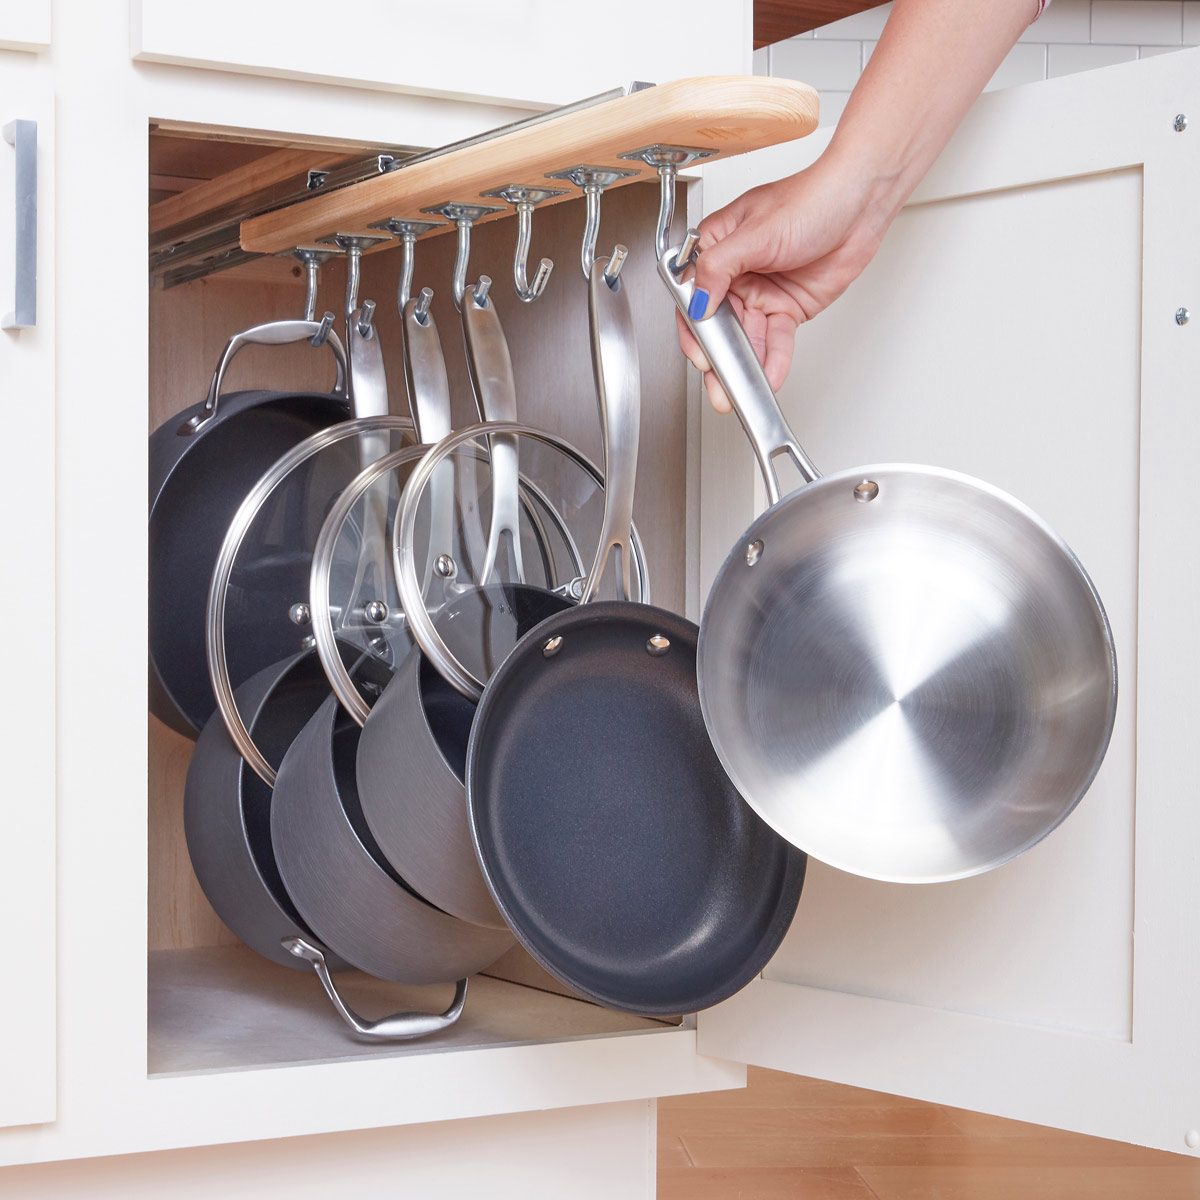 Open Cabinet Shelves to store pots and pans